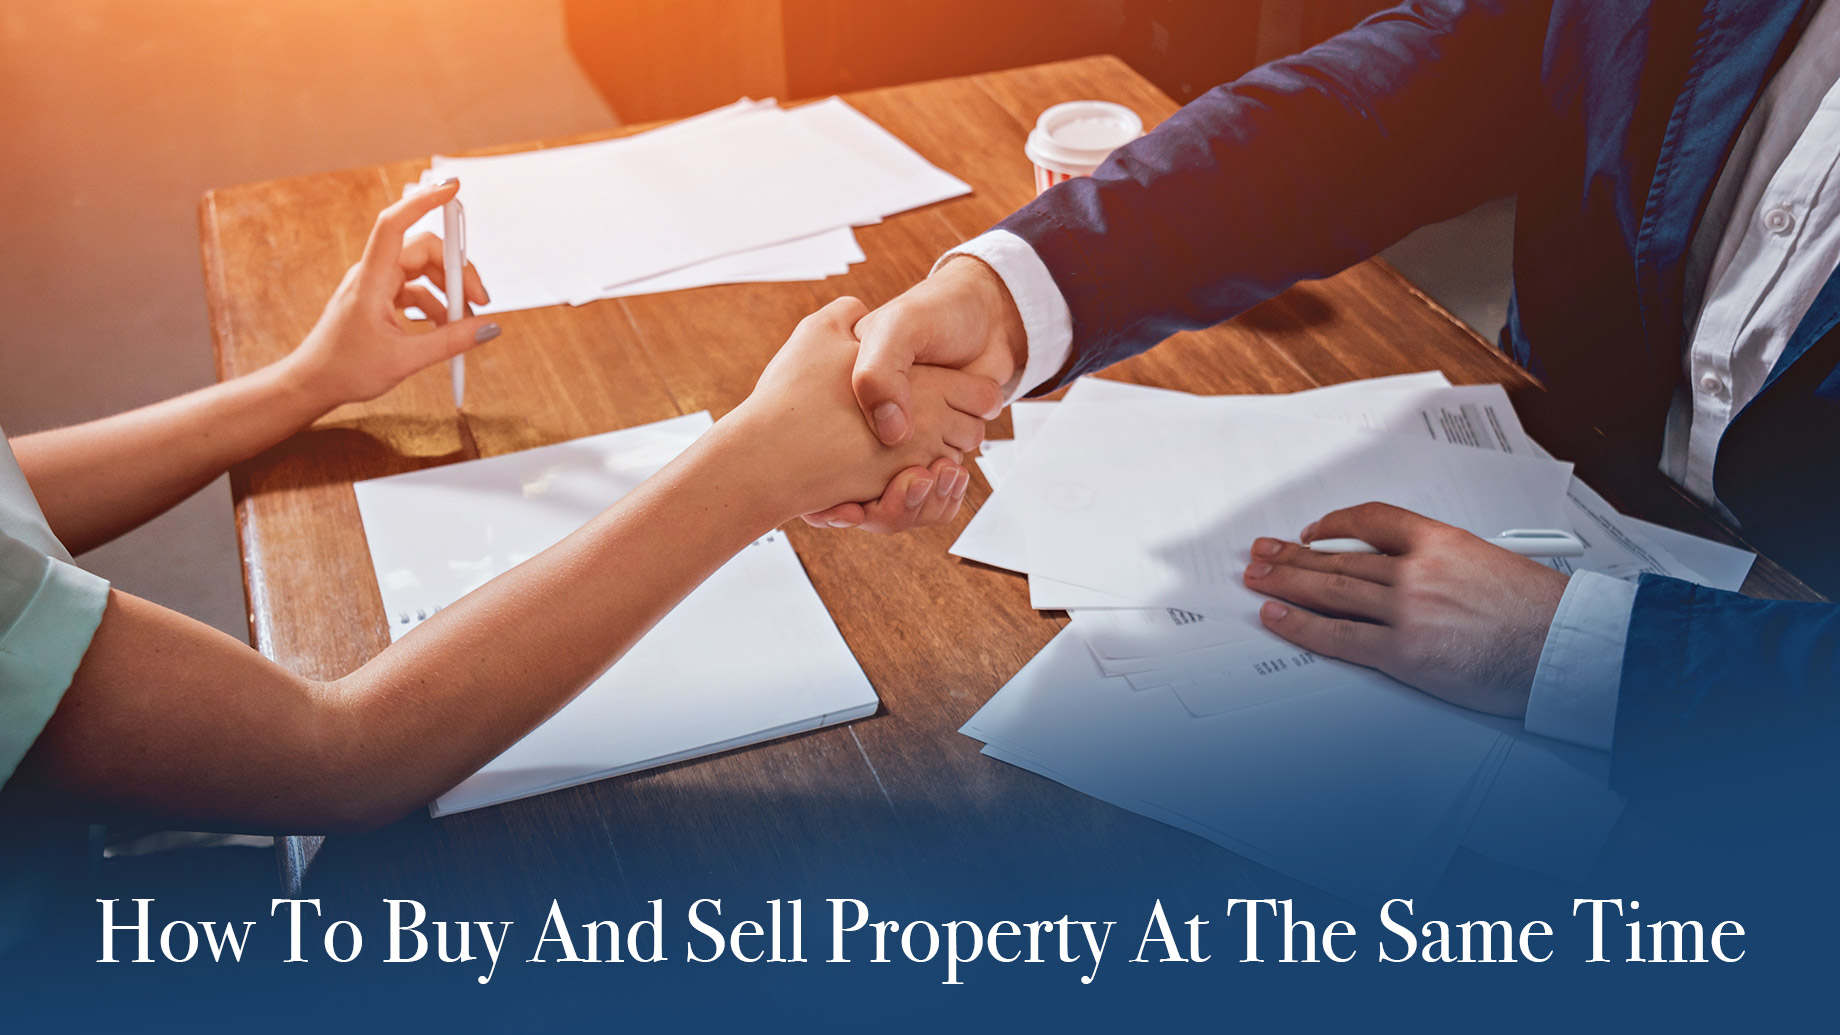 How To Buy And Sell Property At The Same Time